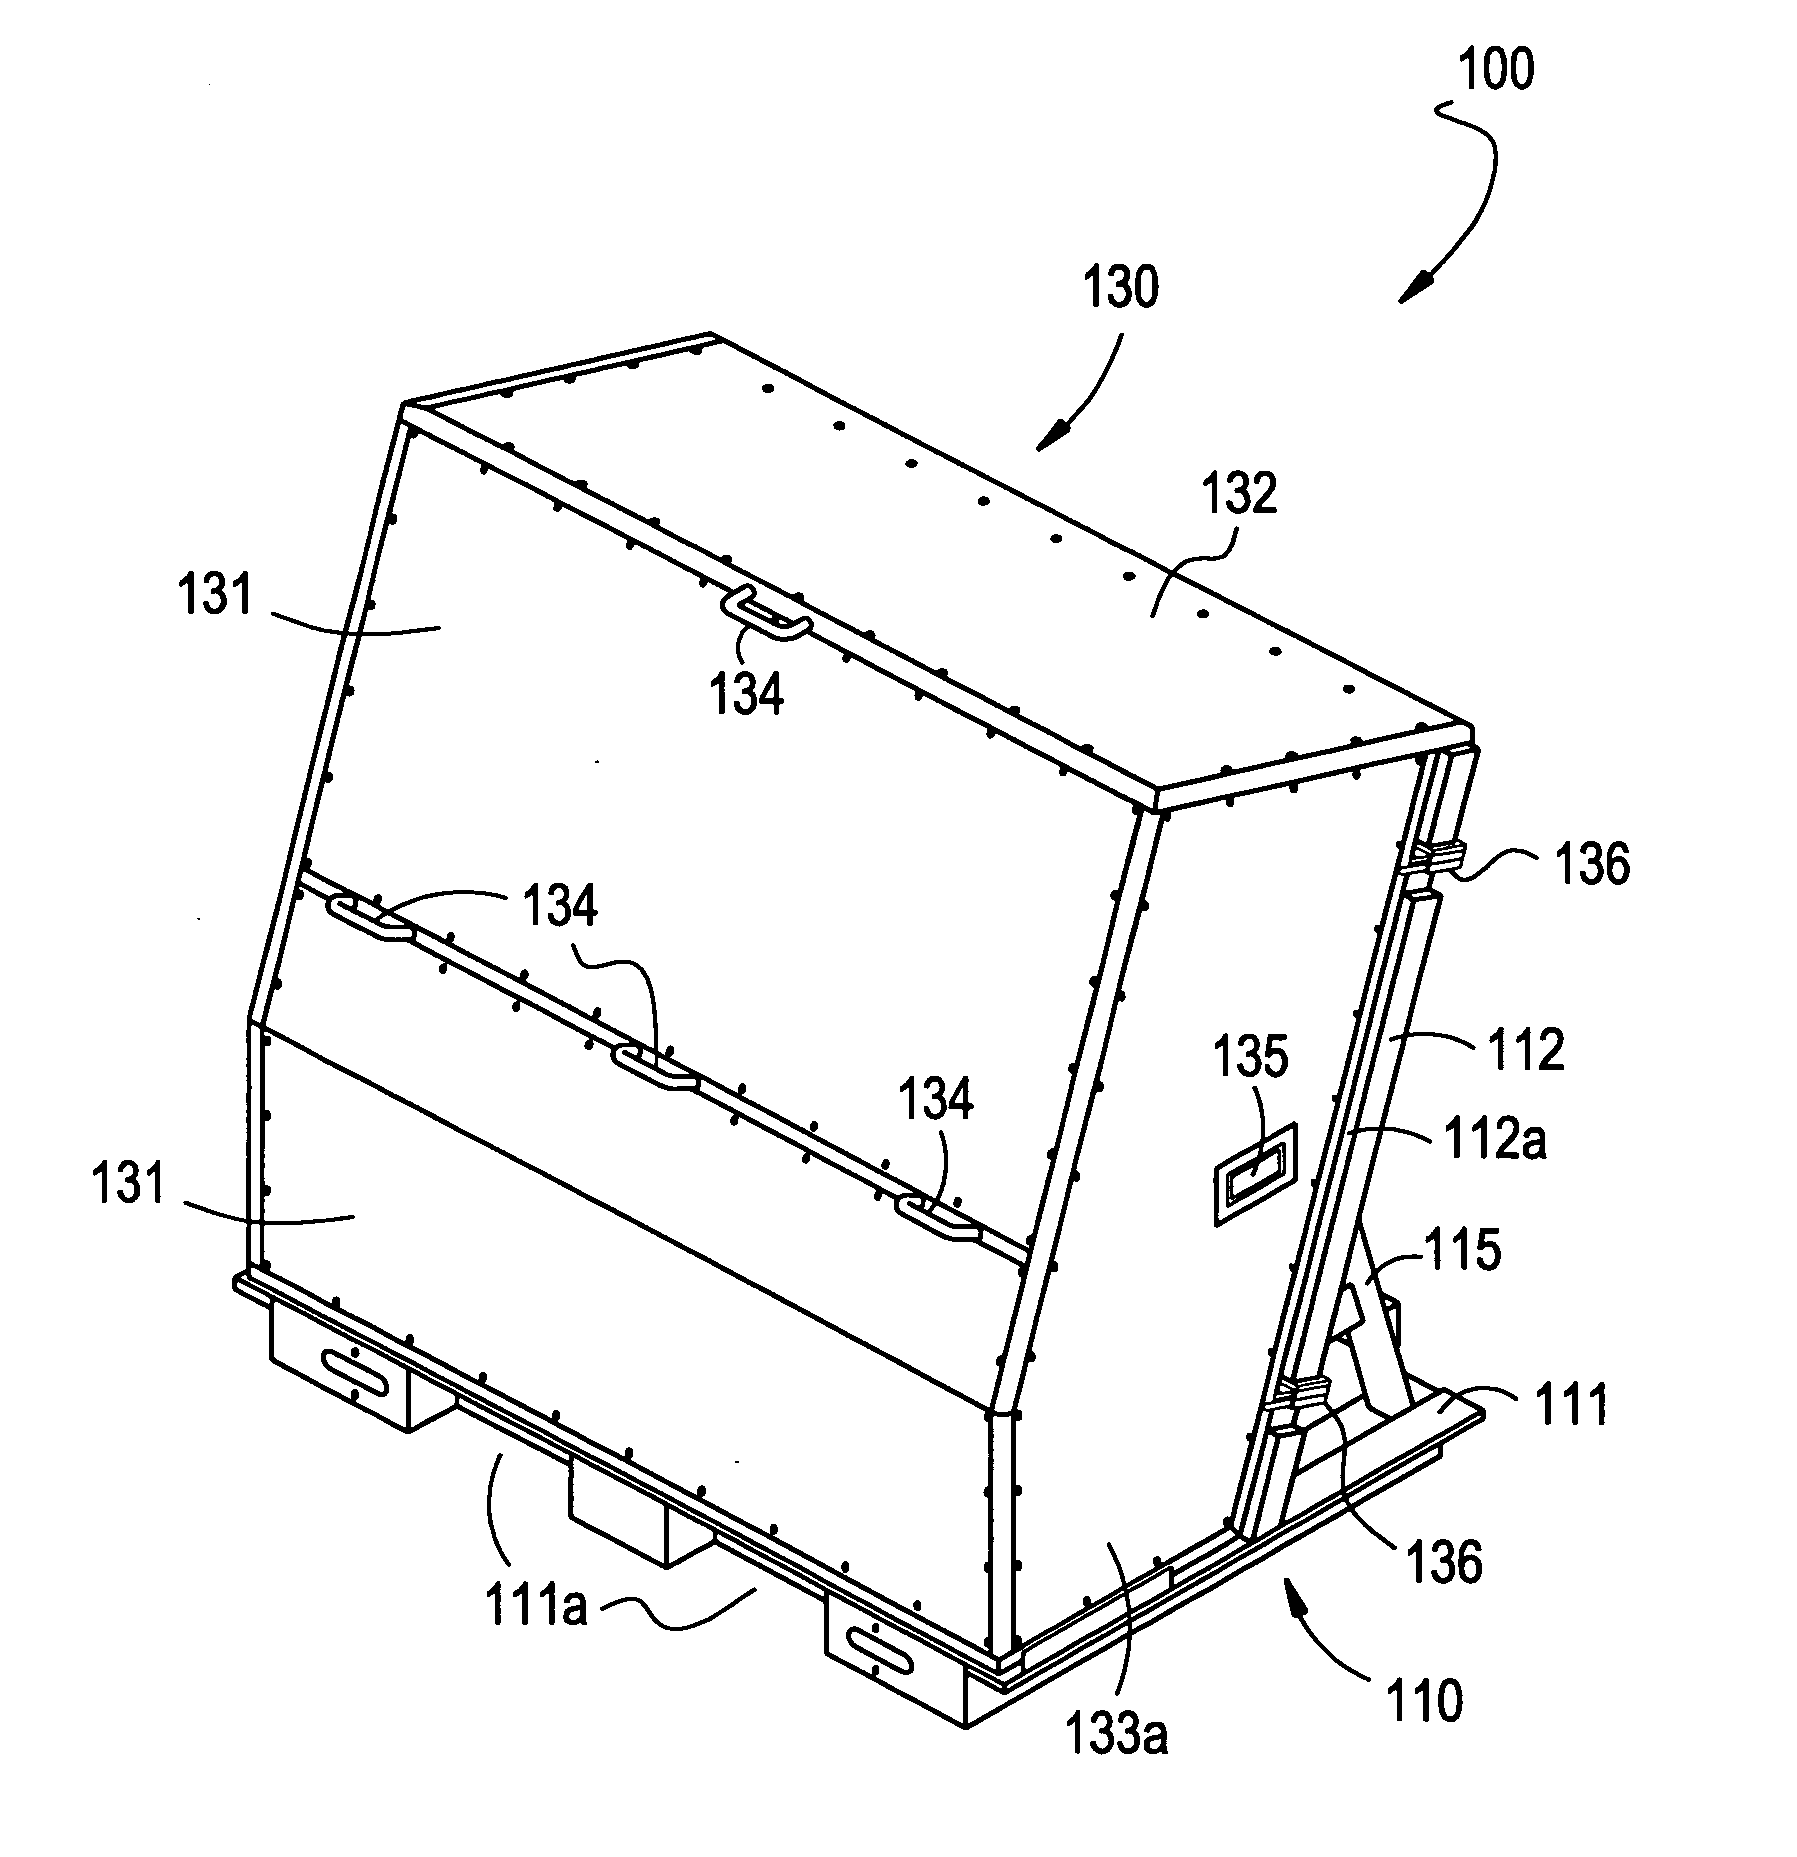 Restraining dense packaging system for LCD glass sheets